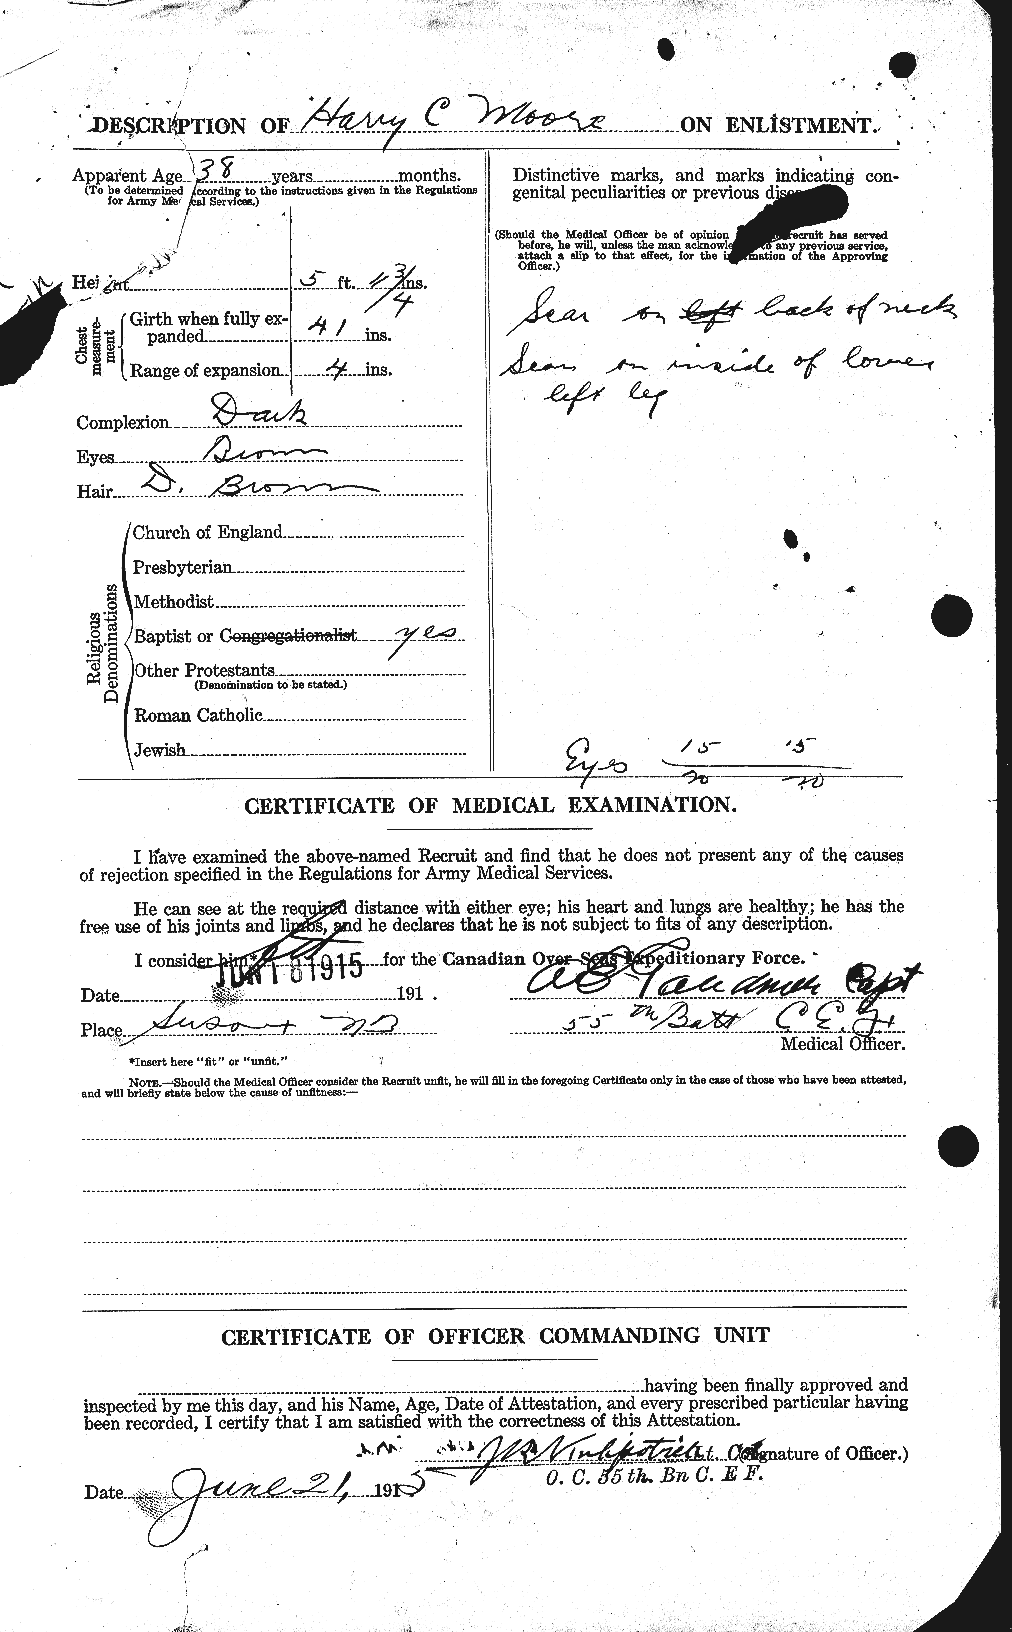 Personnel Records of the First World War - CEF 502080b